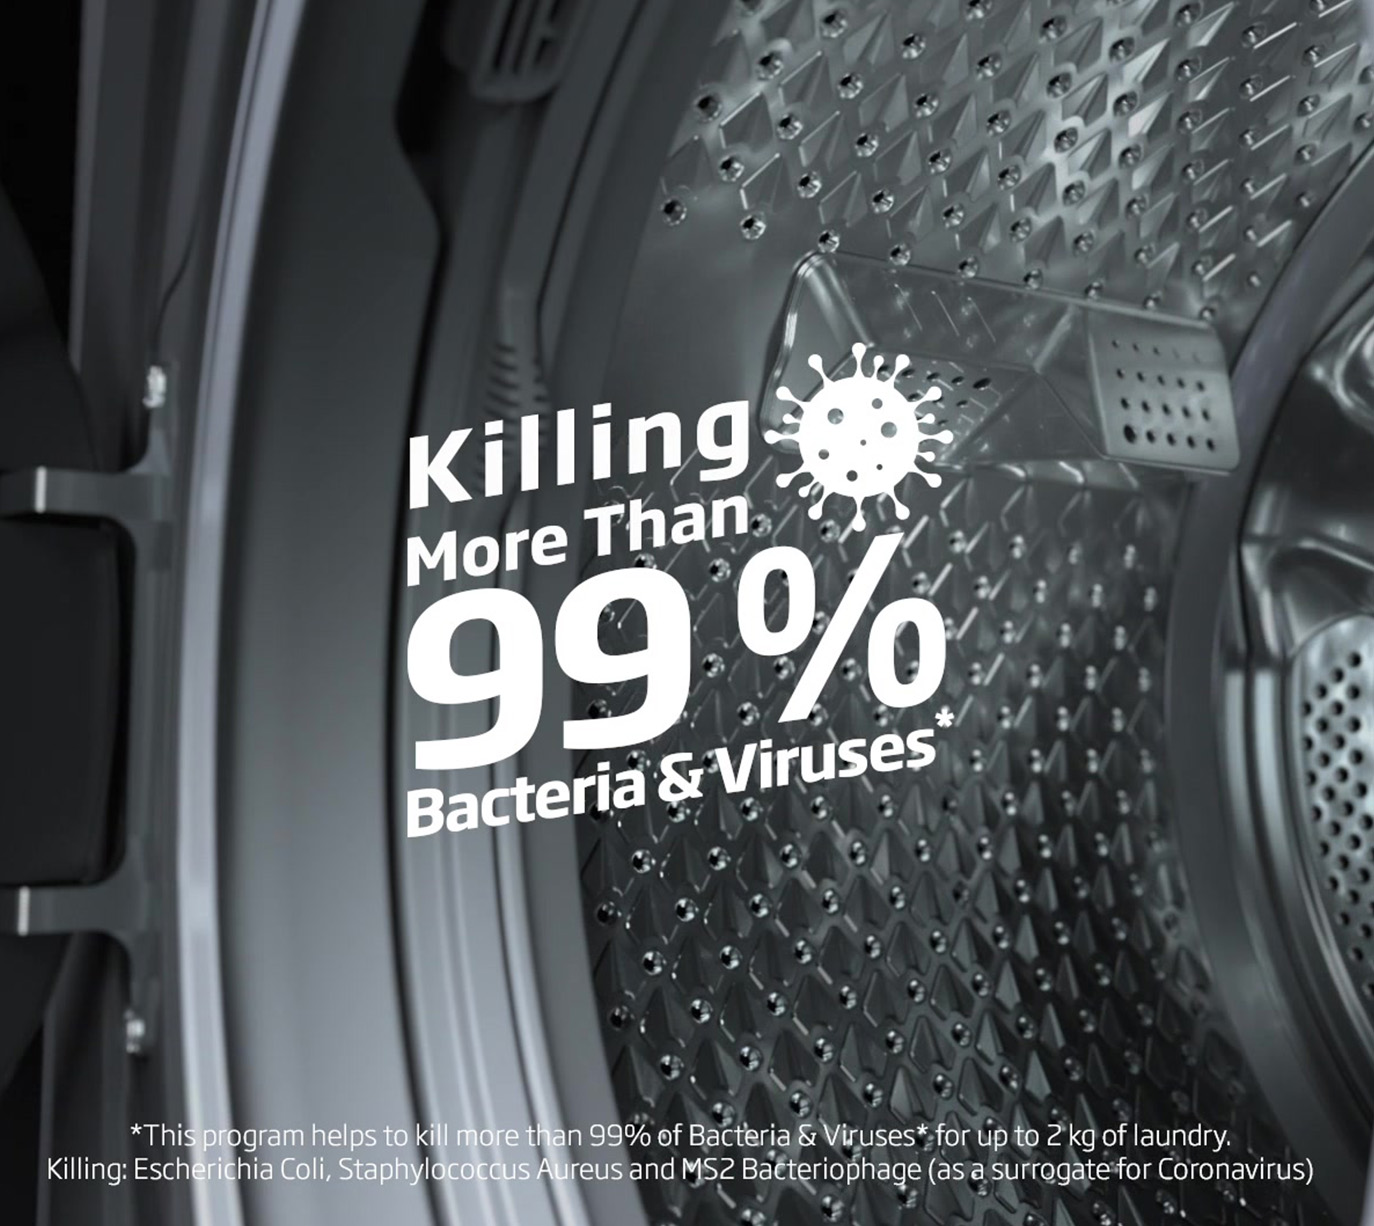 HygieneTherapy- Kills more than 99% of bacteria and viruses